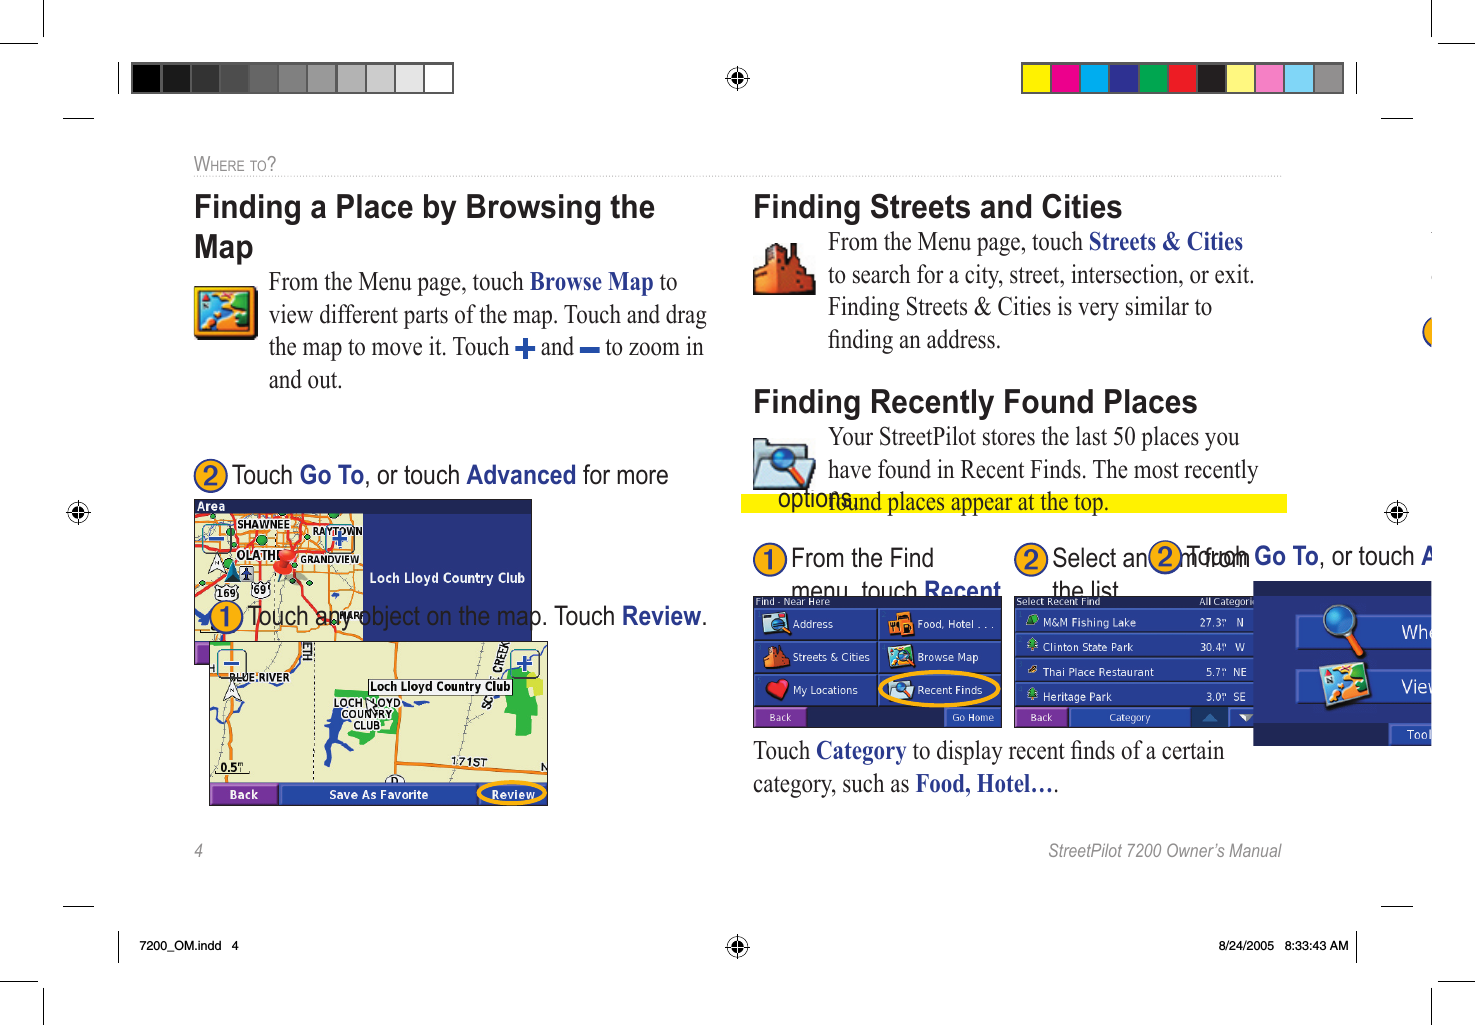 4  StreetPilot 7200 Owner’s ManualWHERE TO?Finding a Place by Browsing the Map  From the Menu page, touch Browse Map to view different parts of the map. Touch and drag the map to move it. Touch   and   to zoom in and out. ➋ Touch Go To, or touch Advanced for more  options. Finding Streets and Cities  From the Menu page, touch Streets &amp; Cities to search for a city, street, intersection, or exit. Finding Streets &amp; Cities is very similar to ﬁnding an address. Finding Recently Found Places  Your StreetPilot stores the last 50 places you have found in Recent Finds. The most recently found places appear at the top. ➋ Select an item from  the list.➊ From the Find menu, touch Recent Finds.Touch Category to display recent ﬁnds of a certain category, such as Food, Hotel…. Changing Your Search AreaYou can change the search parameters to ﬁnd places in a different area. ➊ Touch any object on the map. Touch Review. ➋ Touch Go To, or touch Advanced for more  options. Finding a Place Near Another PlaceAfter you ﬁnd a place, press the Find key. The Find menu opens and searches for items around the place you just found. Narrowing Your SearchYou can spell the item’s name to narrow your search results list. ➊ Touch any object on the map. Touch Review. ➊ Touch any object on the map. Touch Review. 7200_OM.indd   4 8/24/2005   8:33:43 AM